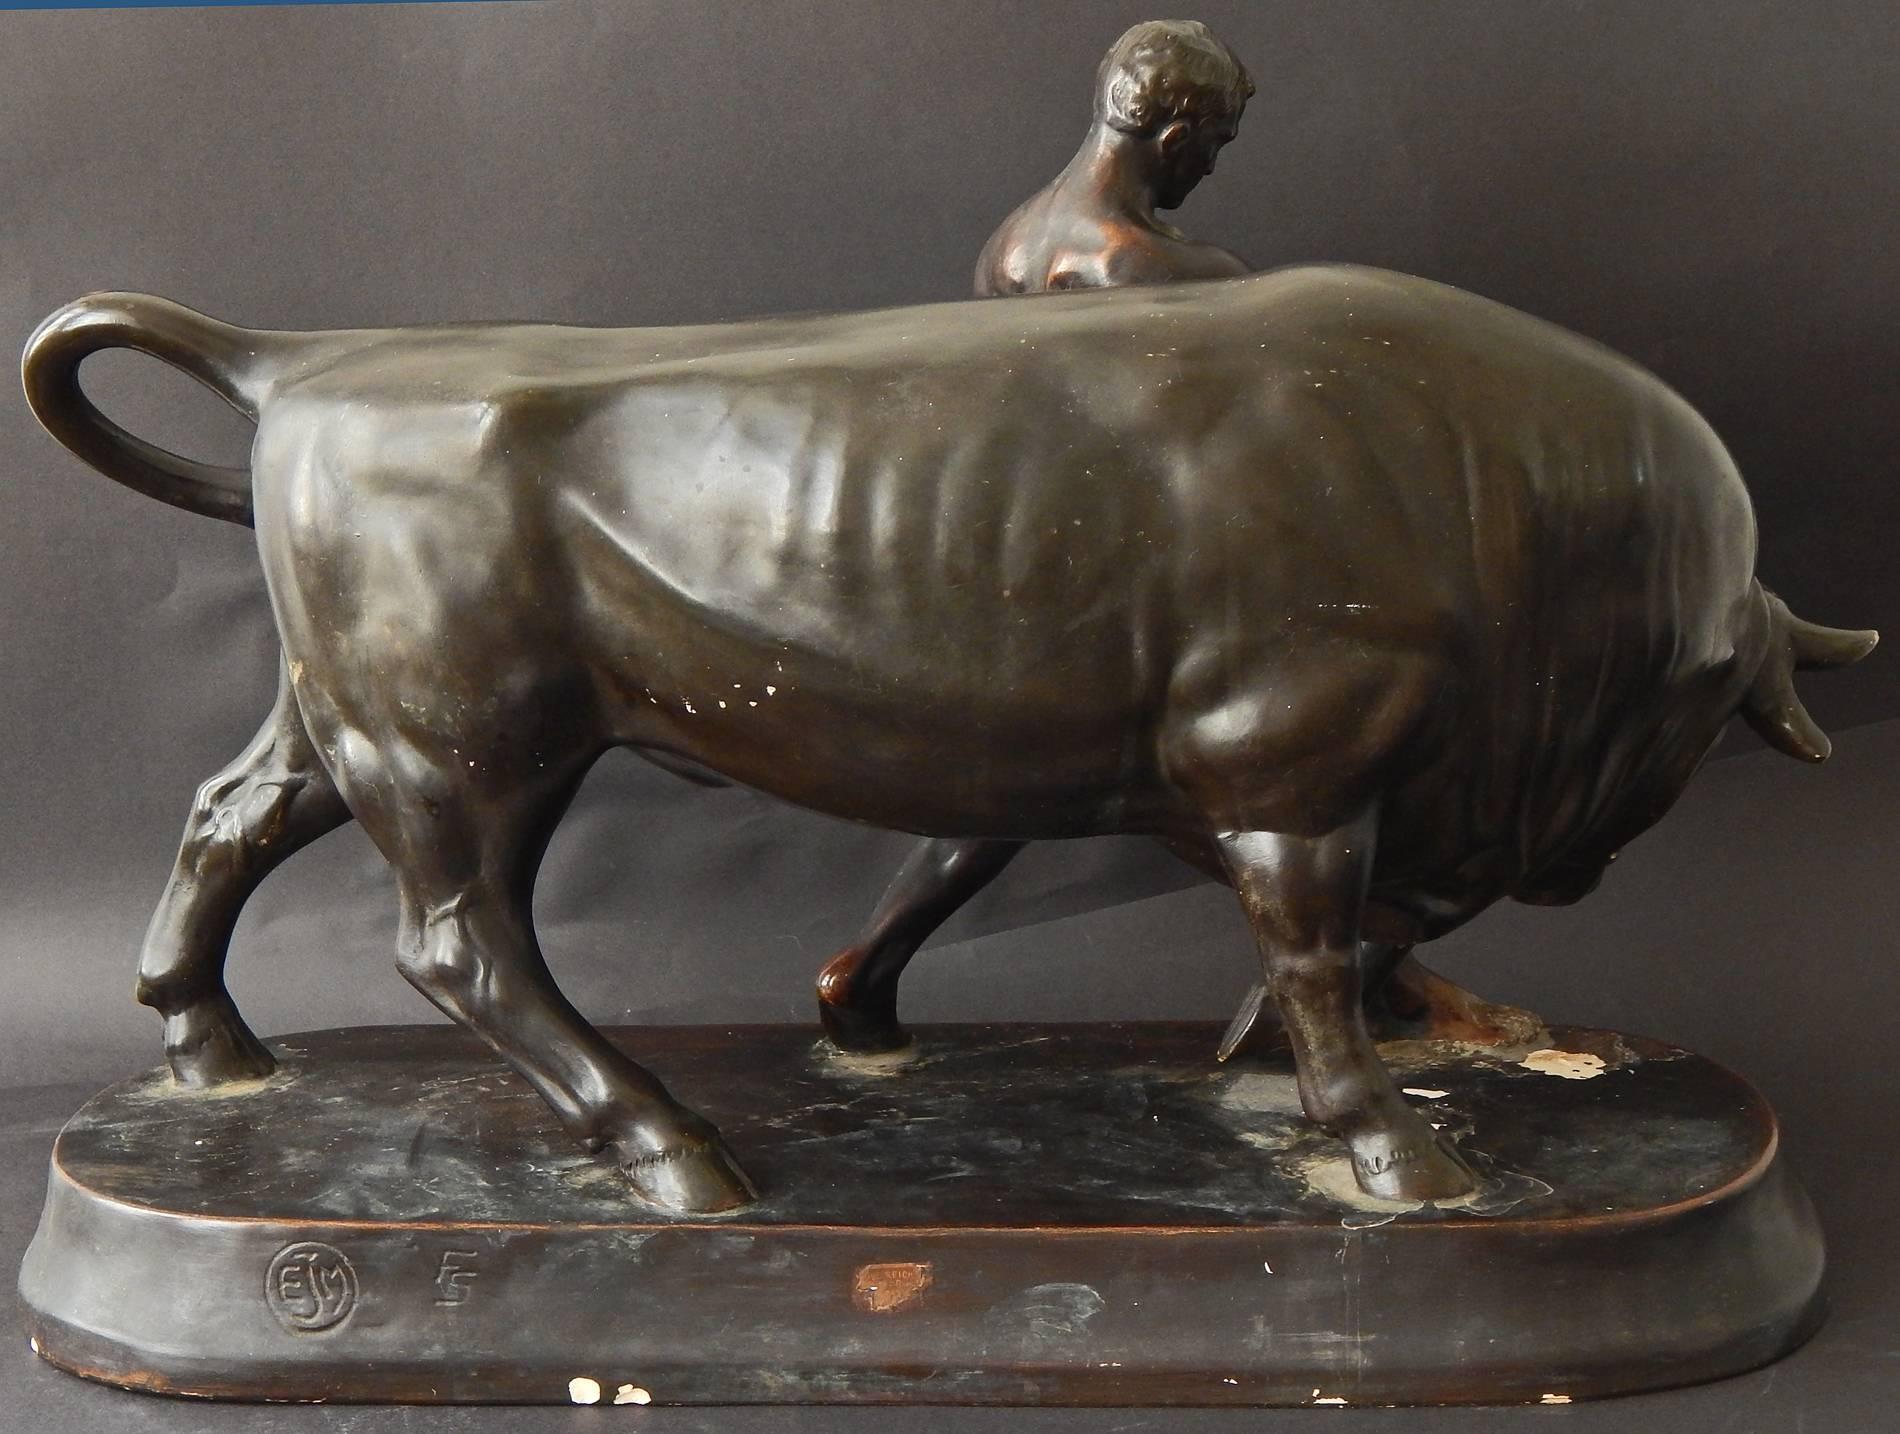 A rare, perhaps unique sculpture, well-marked with the monograms of the sculptor and ceramic works and the label of the original retailer in Germany, this piece depicts a nude male youth leading a bull, one hand on the leather lead and another on